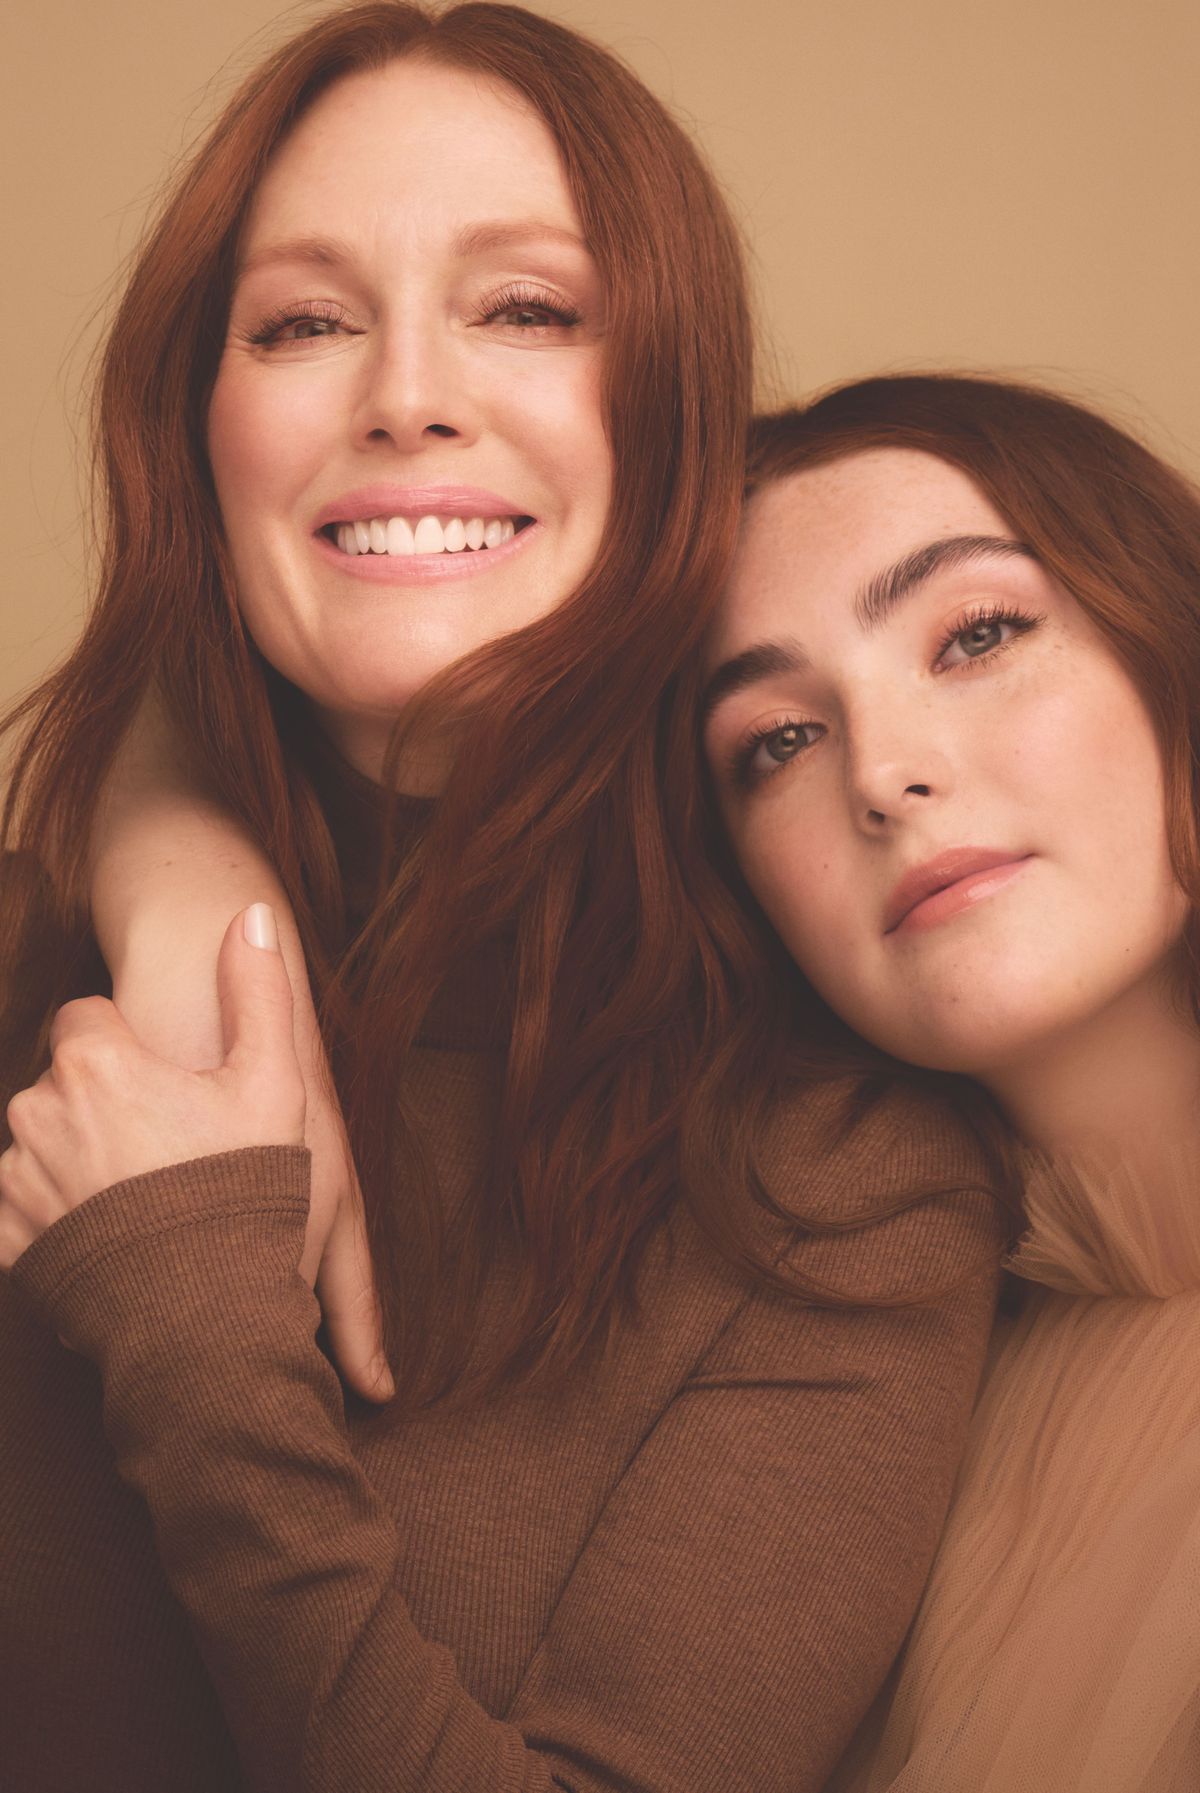 Julianne Moore on Campaign with Daughter